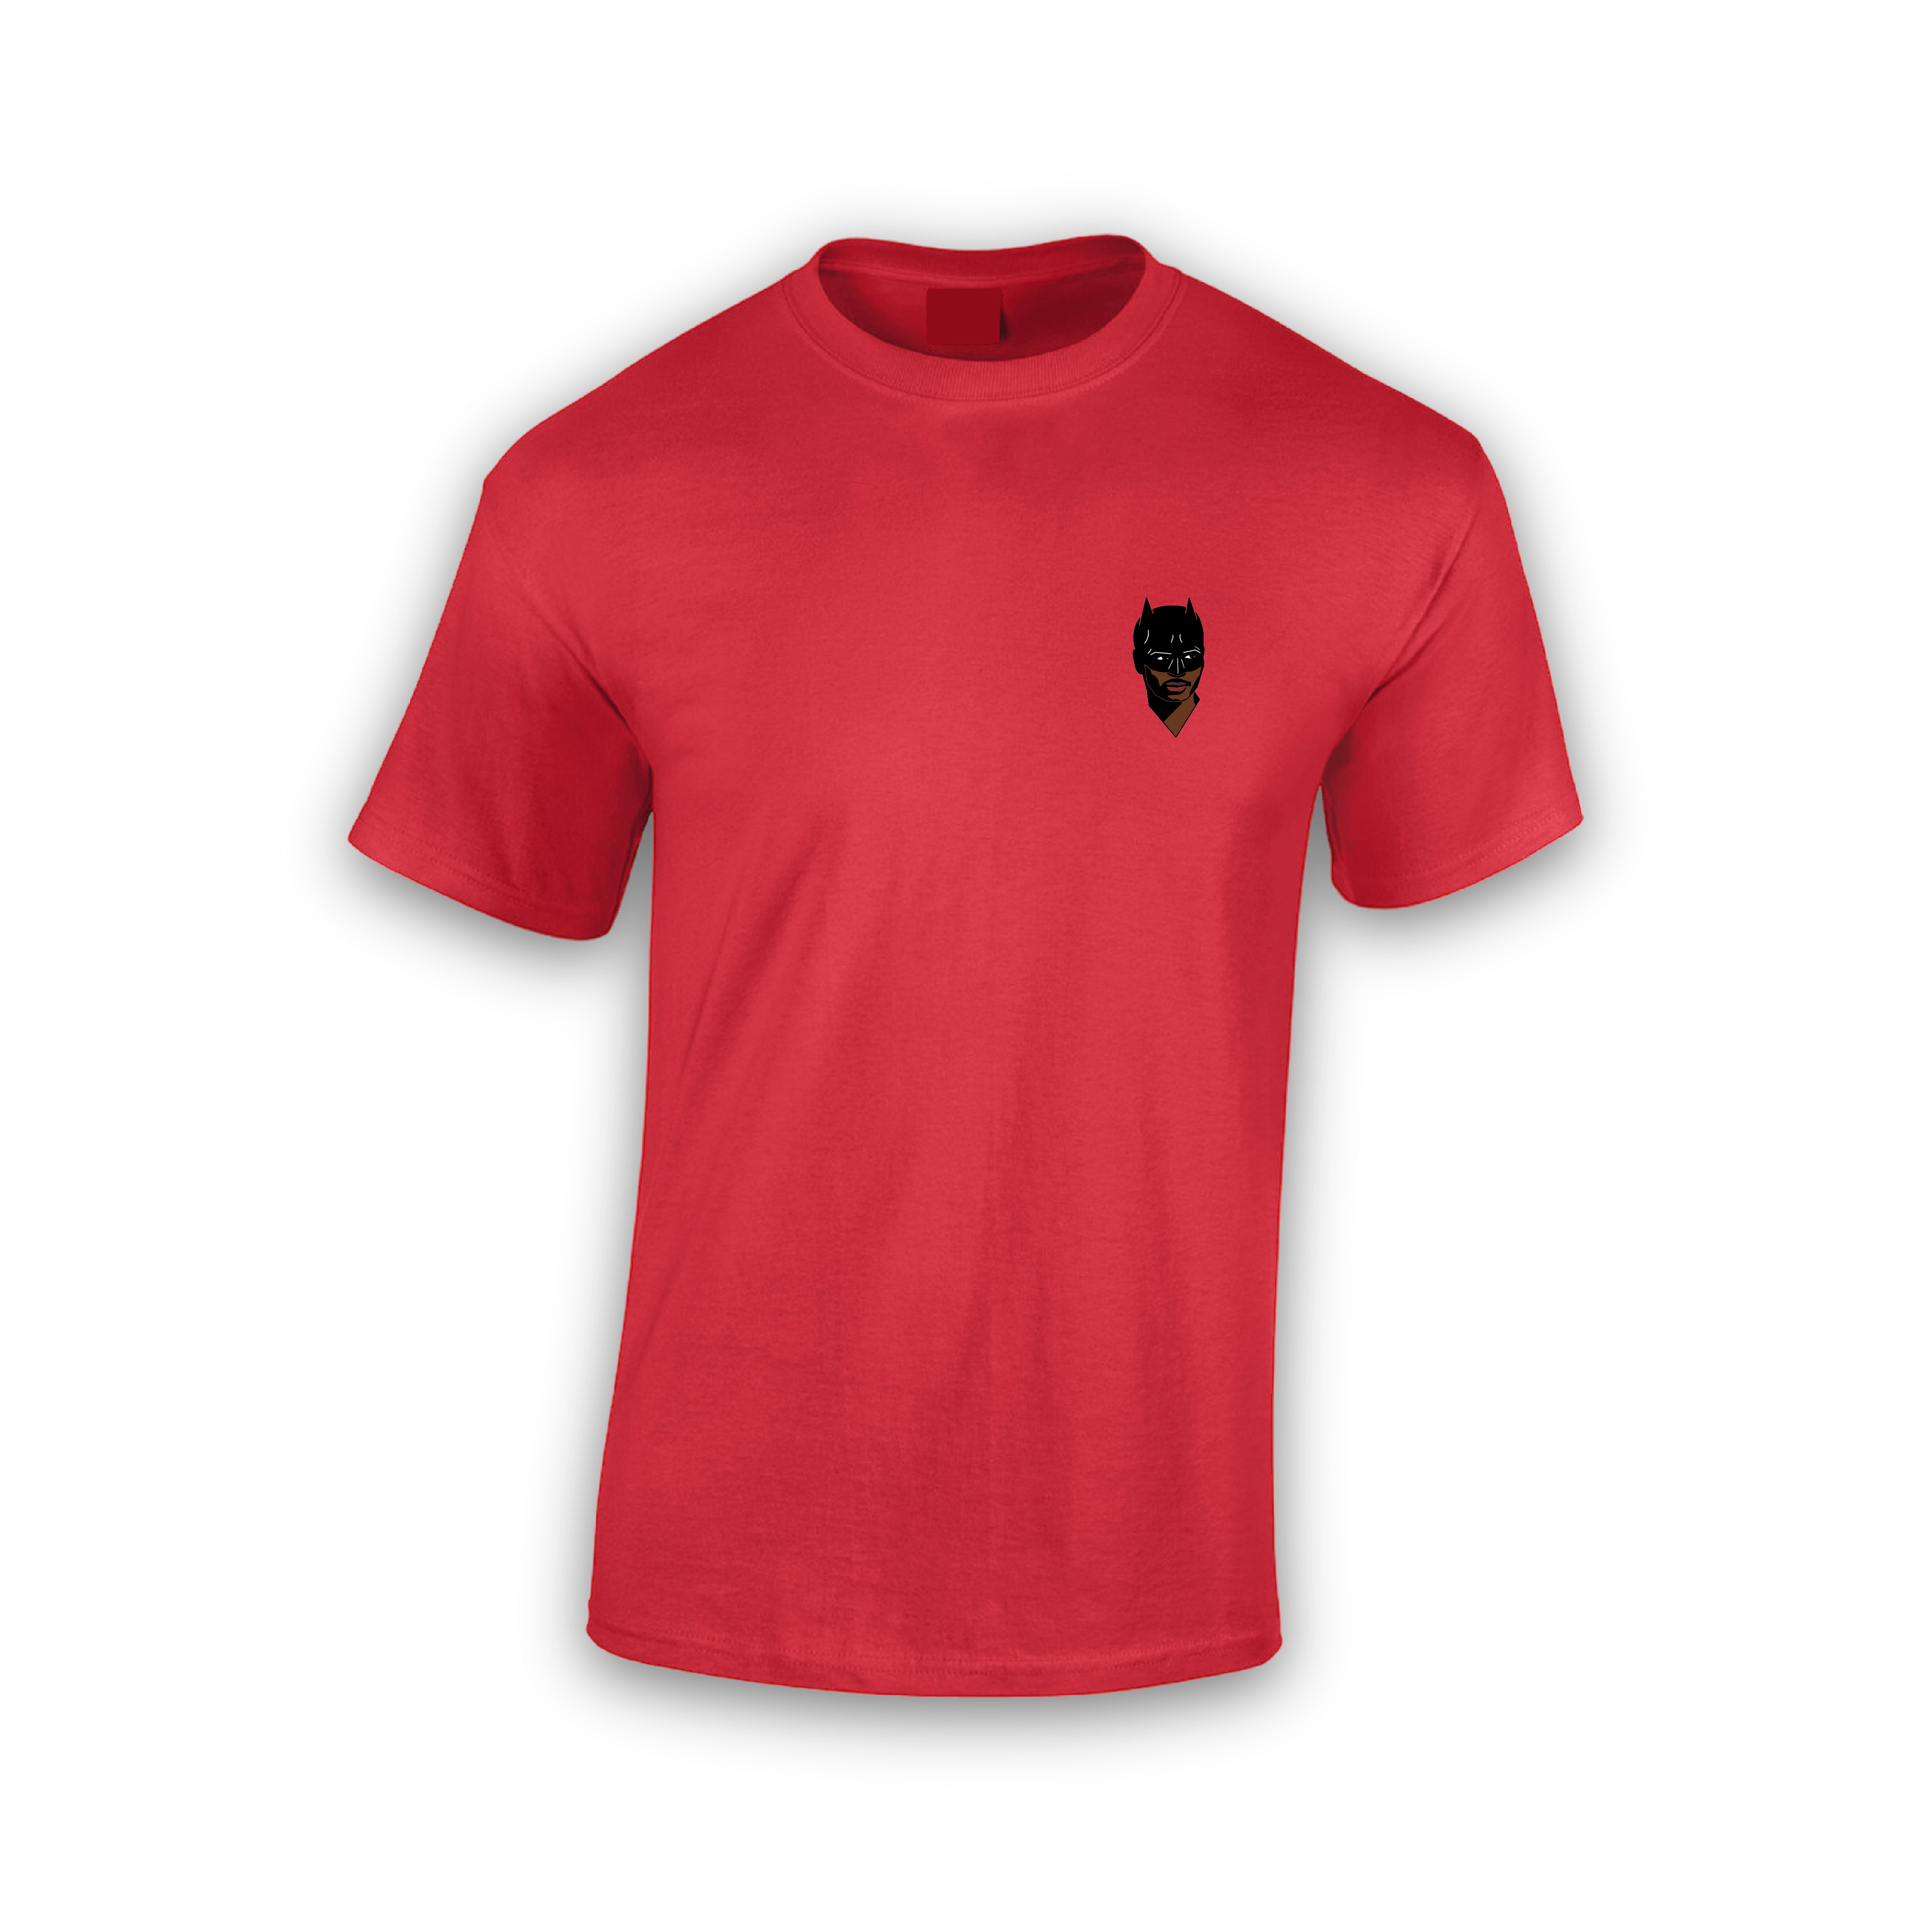 OnlyVarro Vengeance T-shirt Red Large featured image